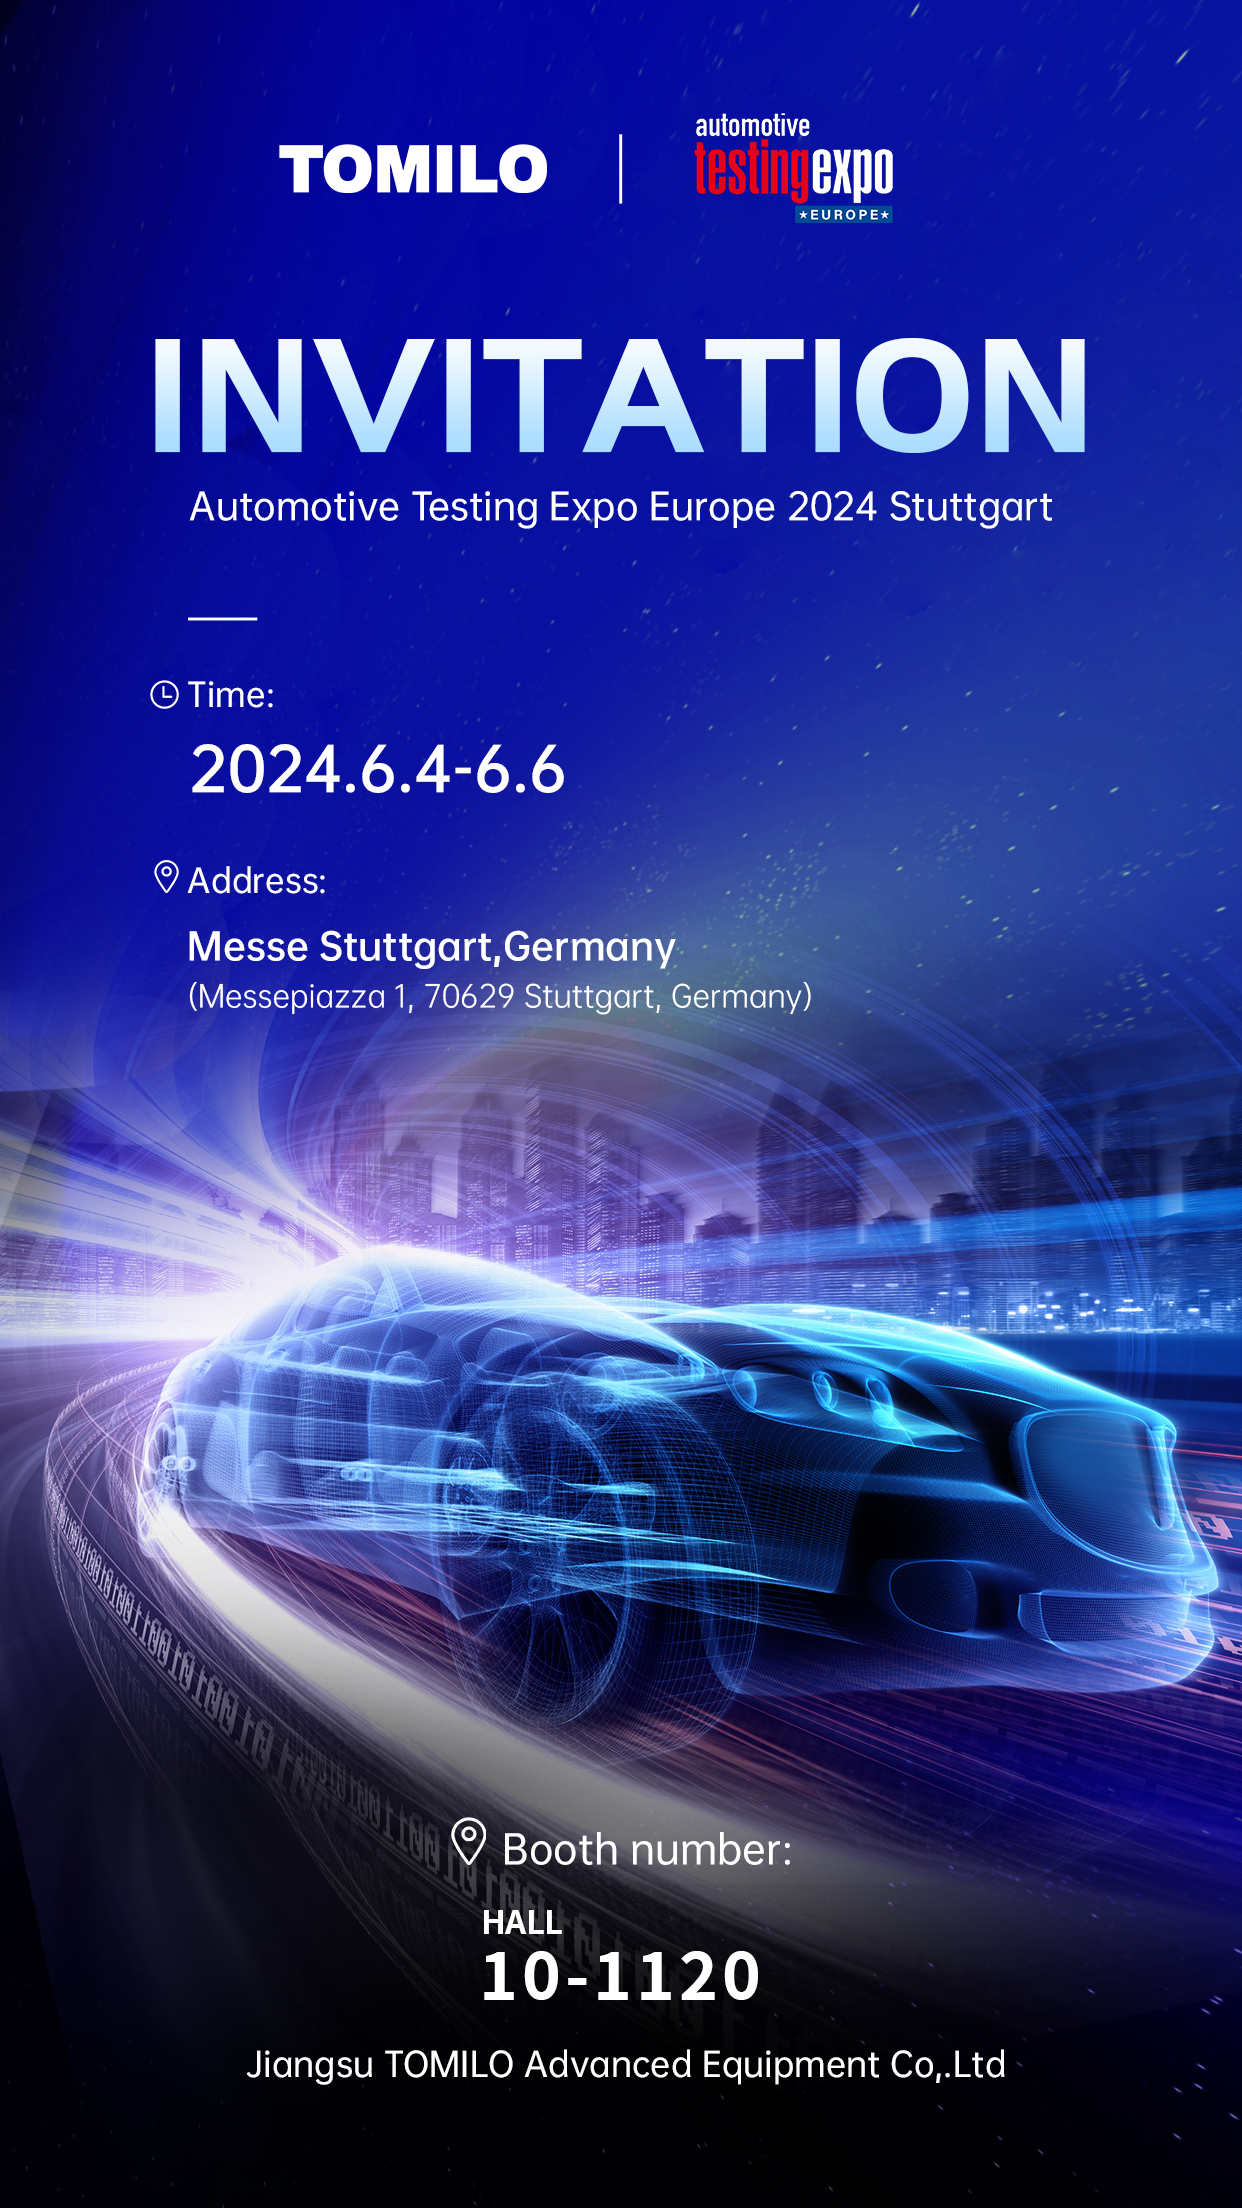 TOMILO invites you to attend the Automotive Testing Expo Europe 2024 Stuttgart